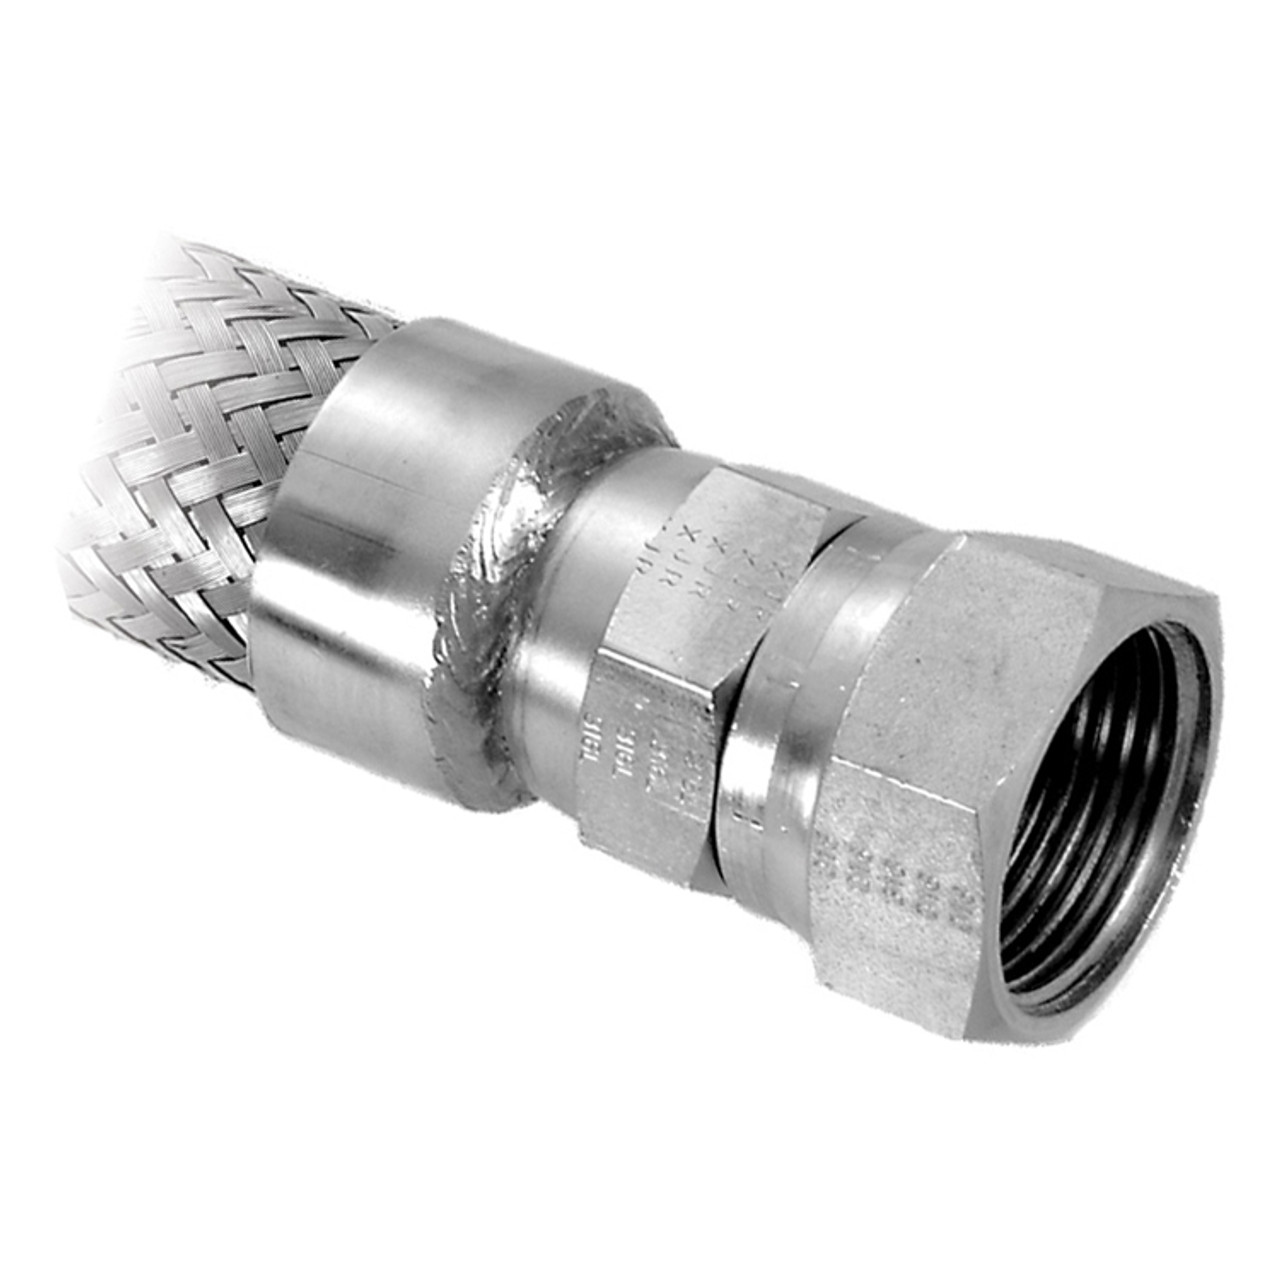 1/2 x 1/2" x 12" Stainless Steel Hose Assembly CSA w/ Female JIC Ends   G521CSA-050JJ-12